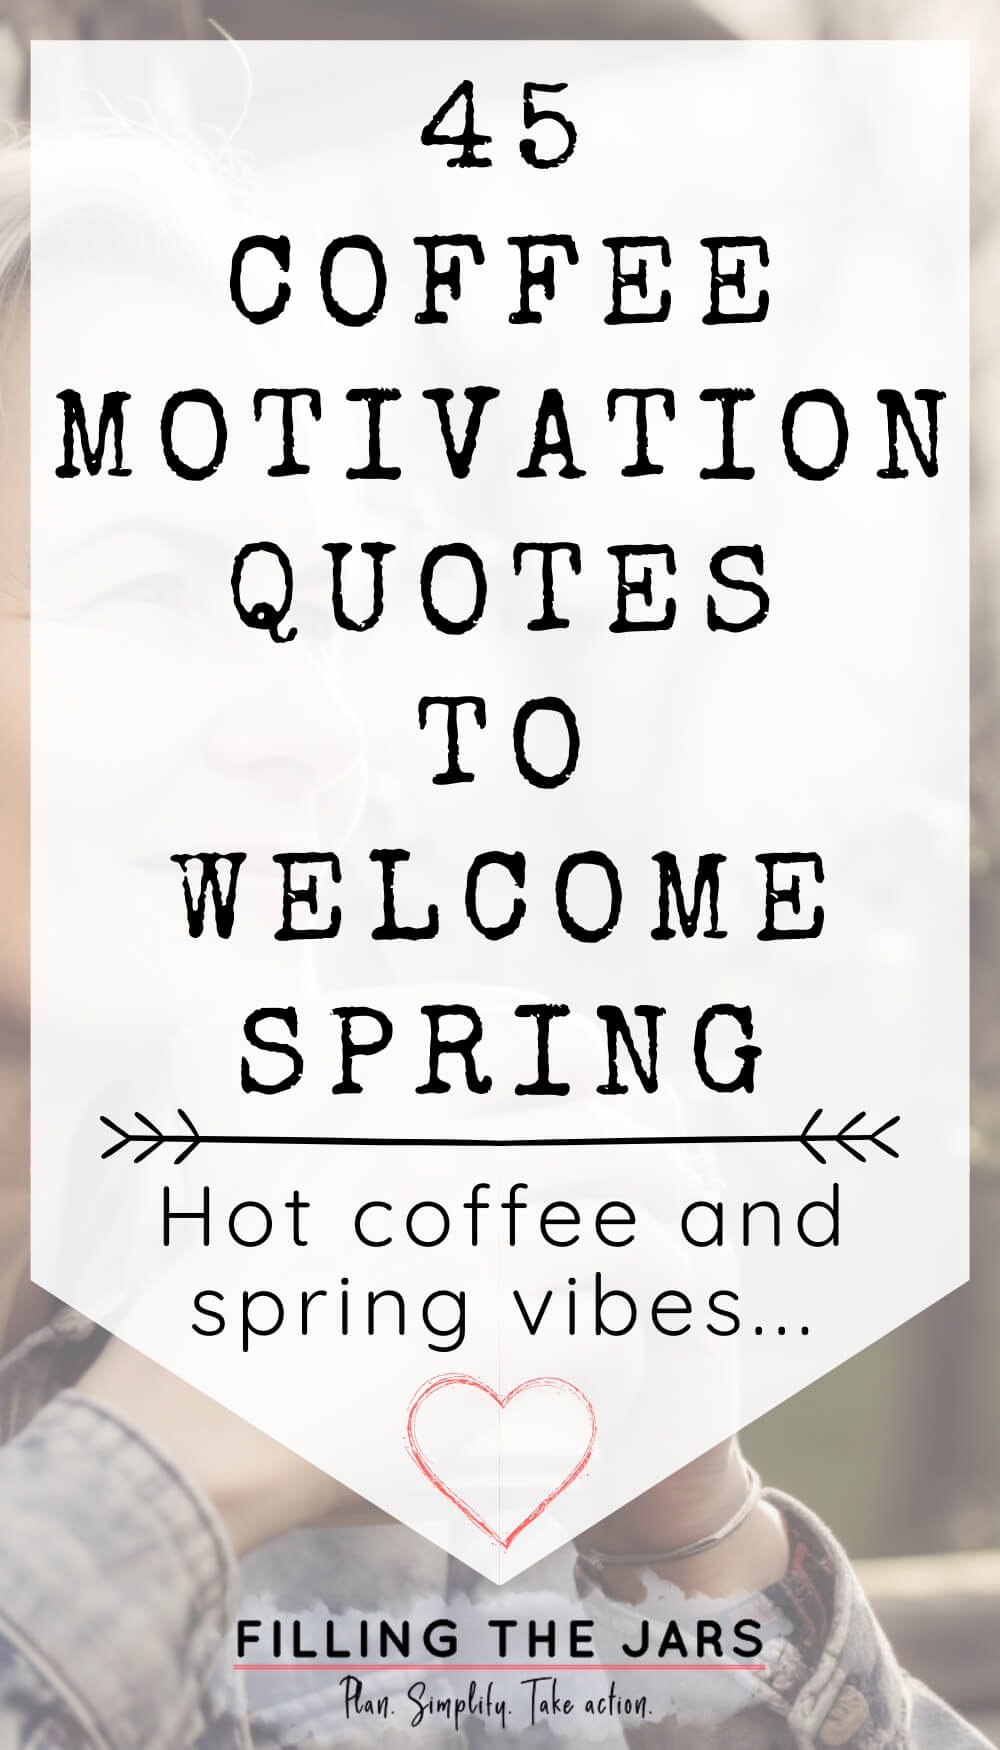 Pinterest image with text '45 coffee motivation quotes to welcome spring' on white background over image of woman drinking coffee outdoors.